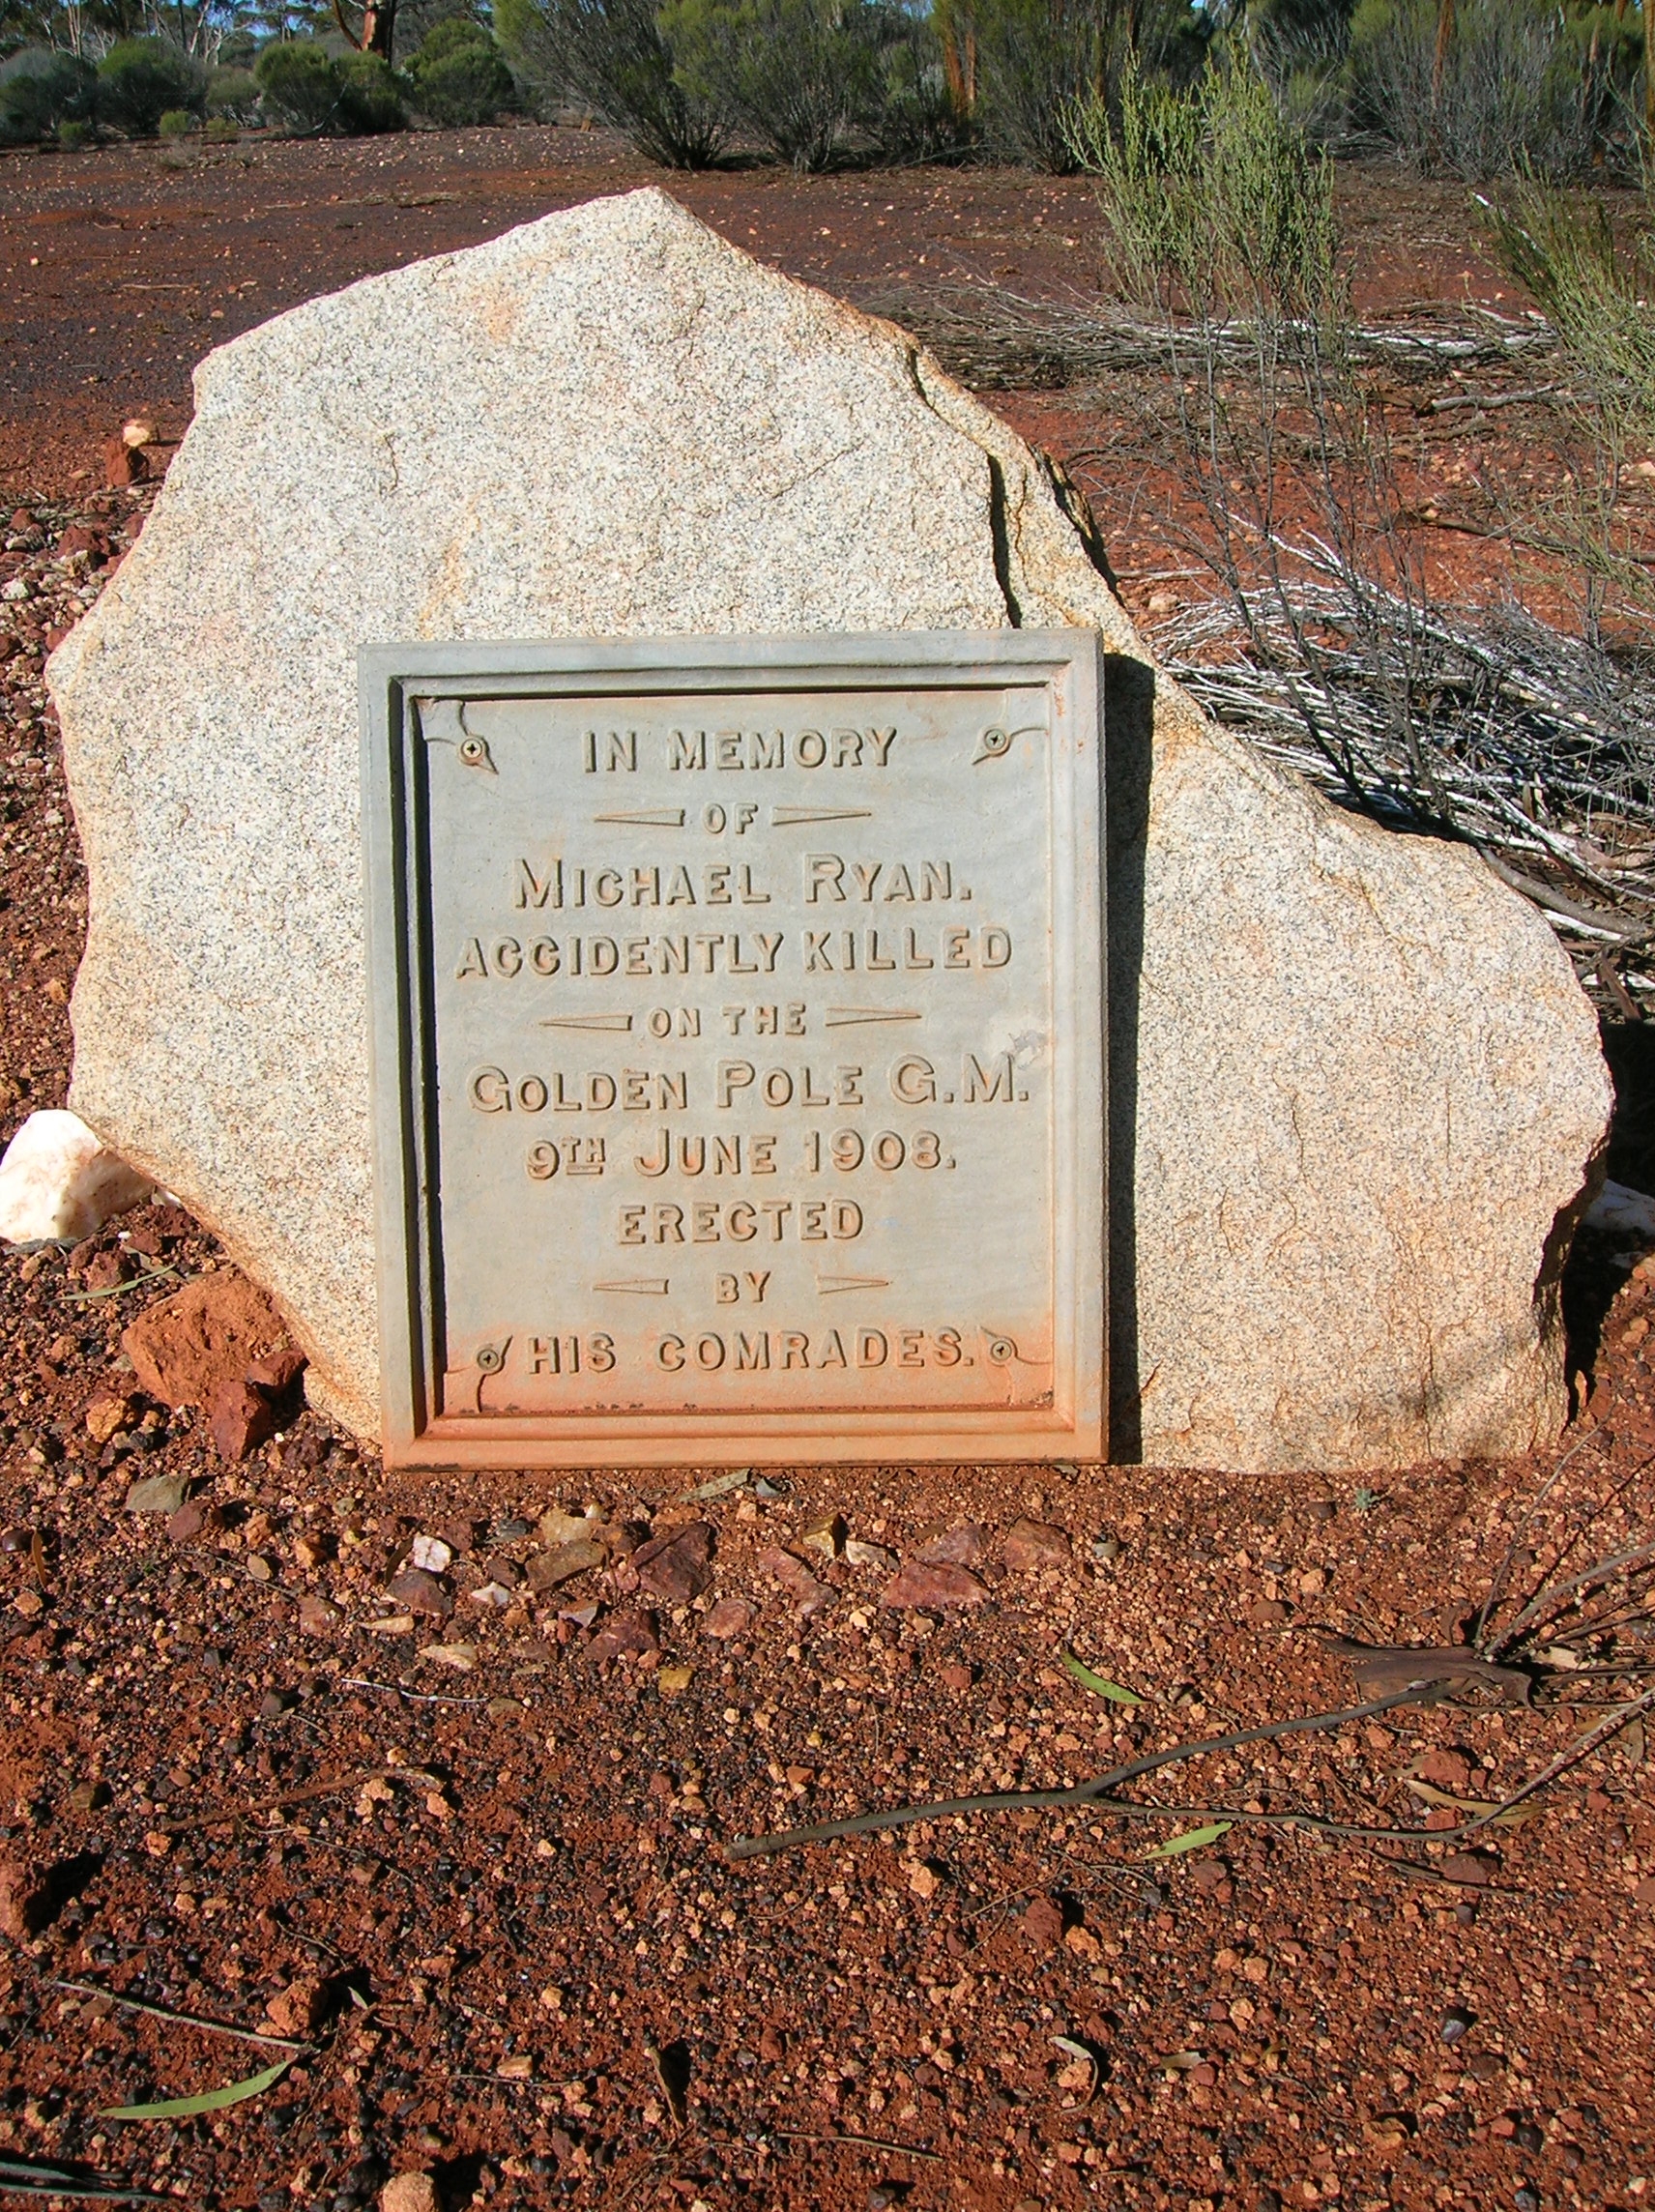 This is a photograph of the Memorial stone for Michael RYAN